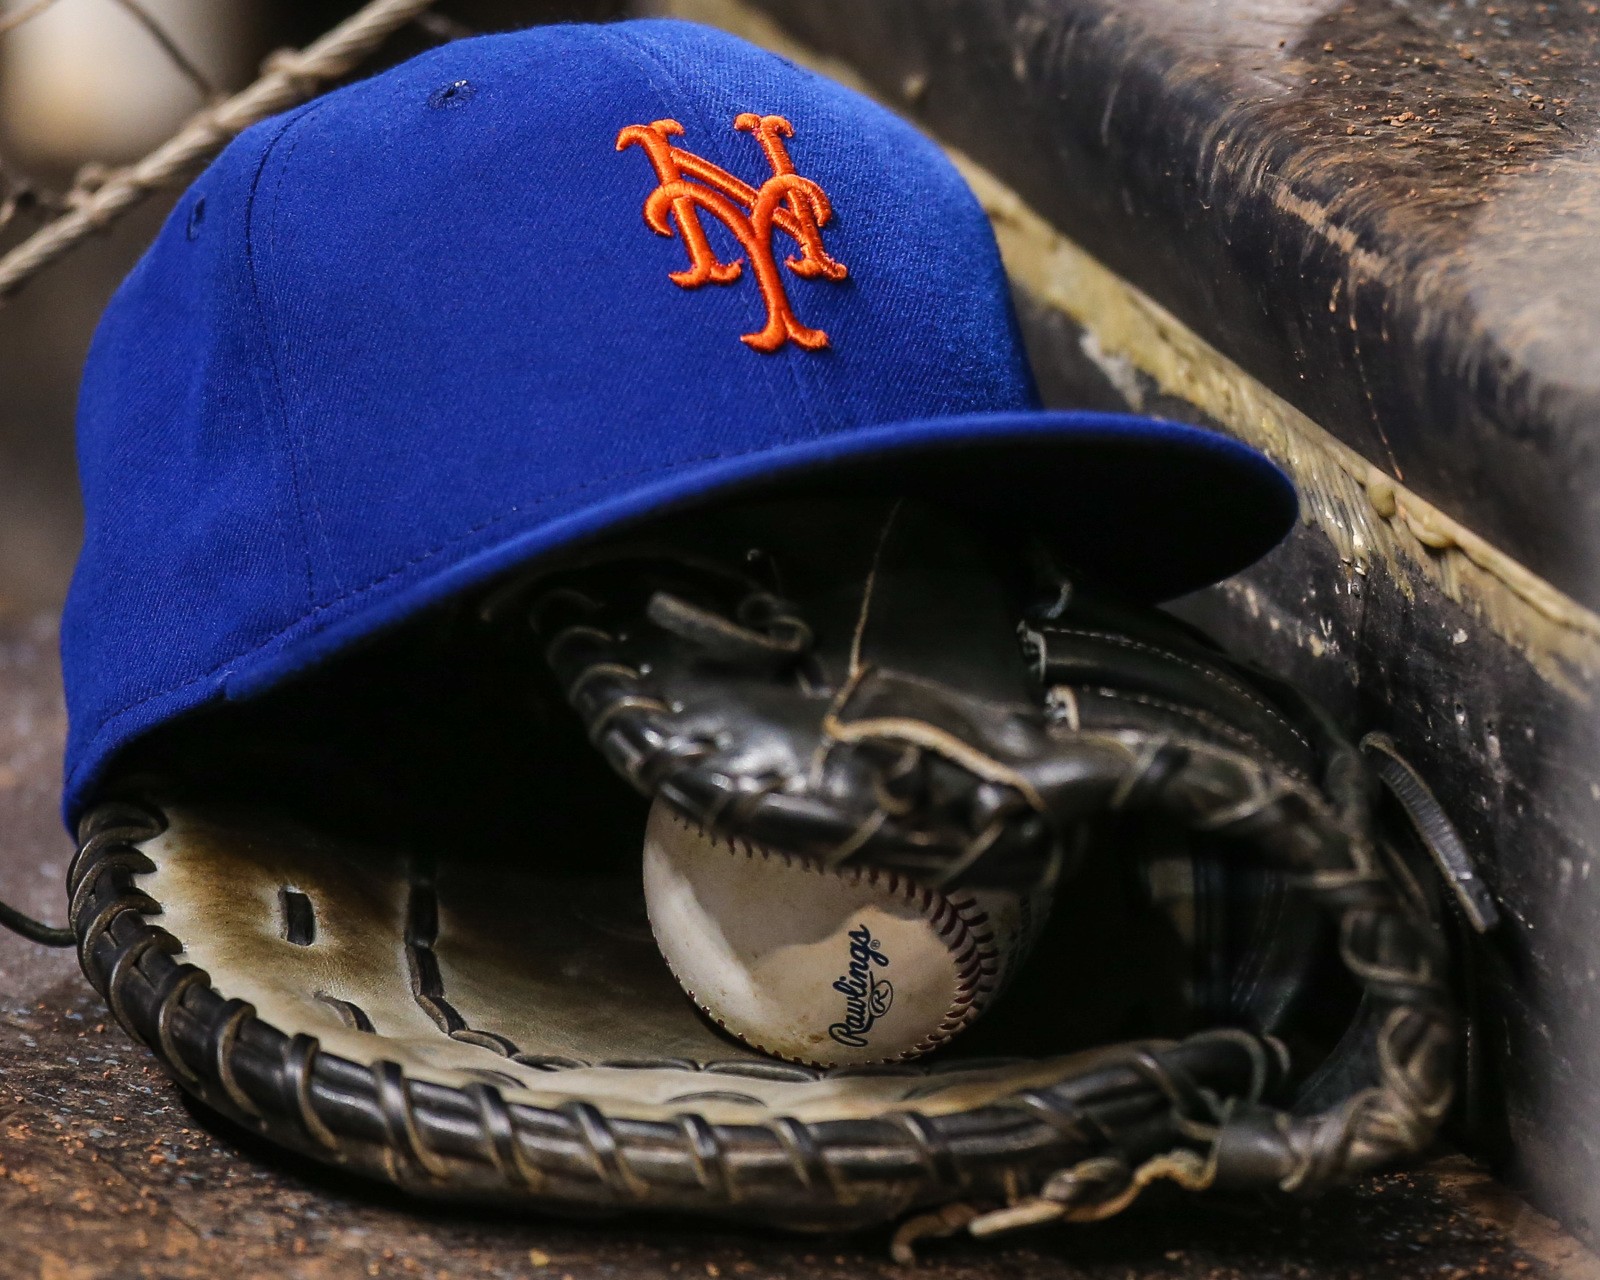 New York Mets: Unwrapping the ultimate fan’s Christmas wish list